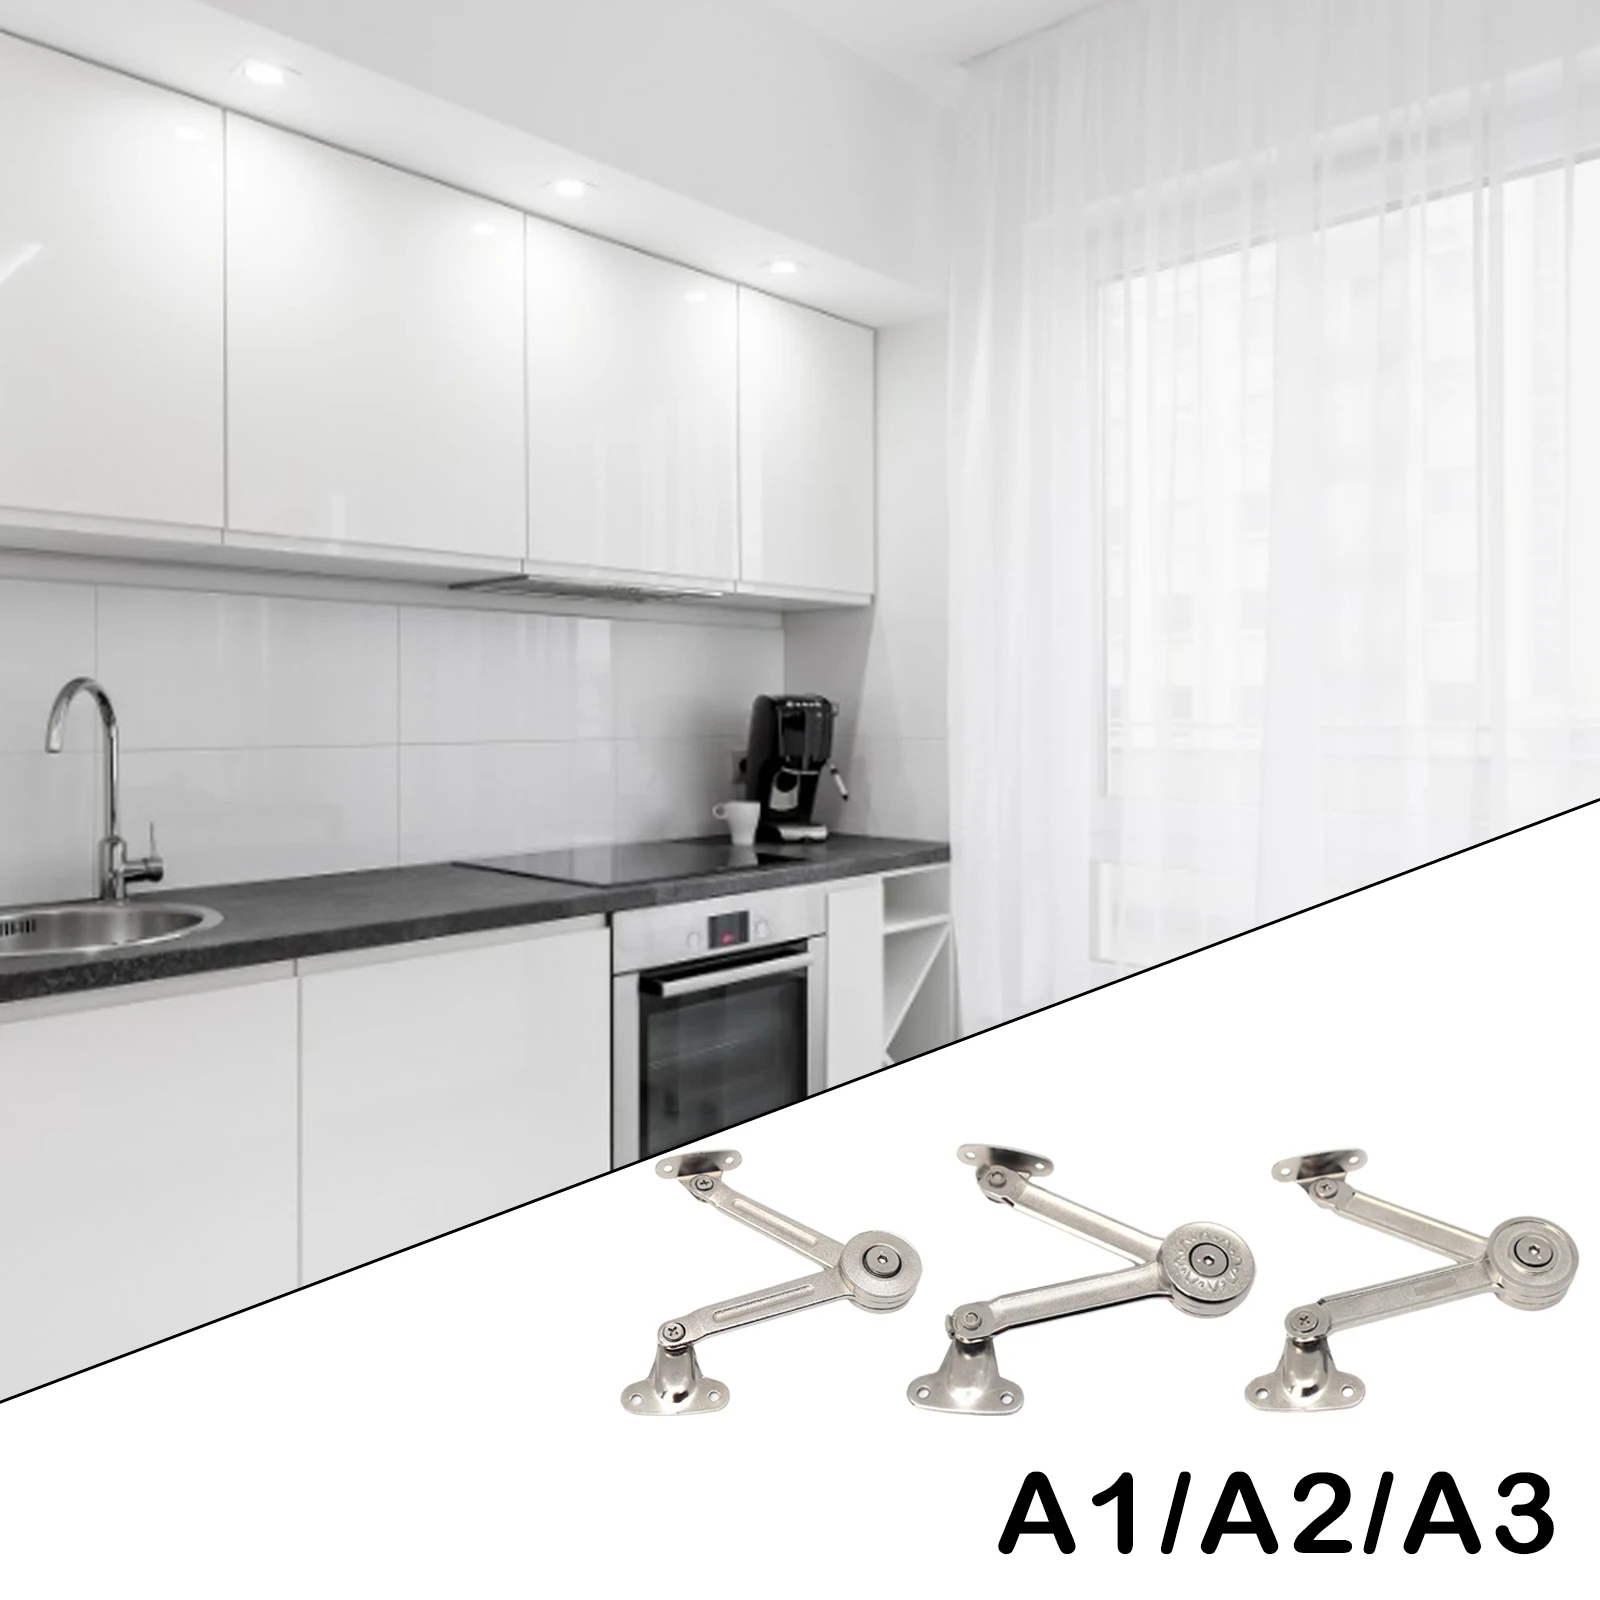 2pcs Heavy Duty Lid Support Hinges, Safety Folding Lid Stay Hinge with flexible close for Cabinet, Kitchen, Chest, Wardrobe